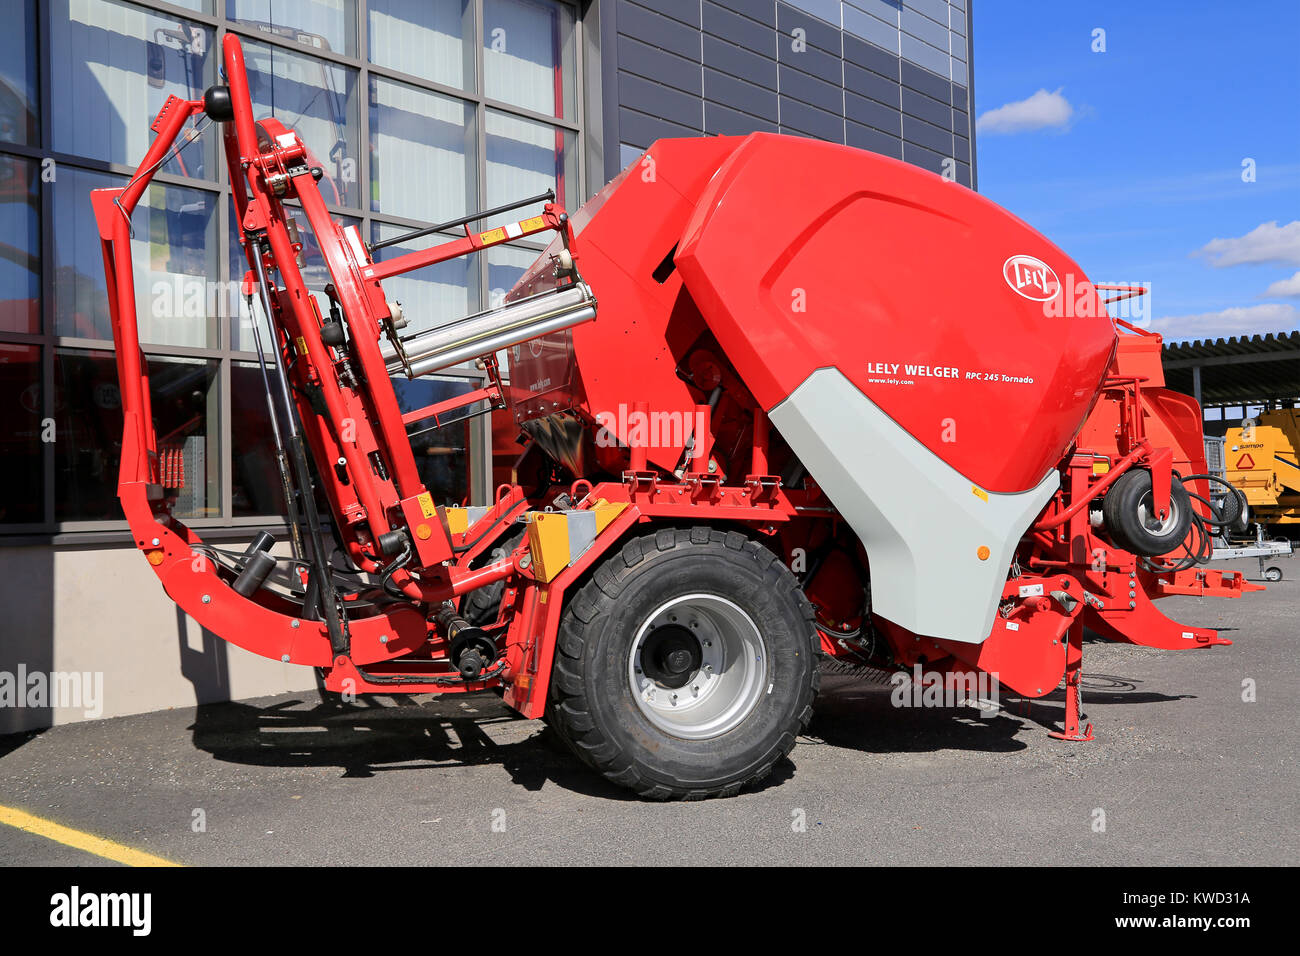 LOIMAA, FINLAND - APRIL 25, 2015: Lely Welger RPC 245 Tornado baler wrapper machine on a yard. The technology incorporated in this machine made it the Stock Photo